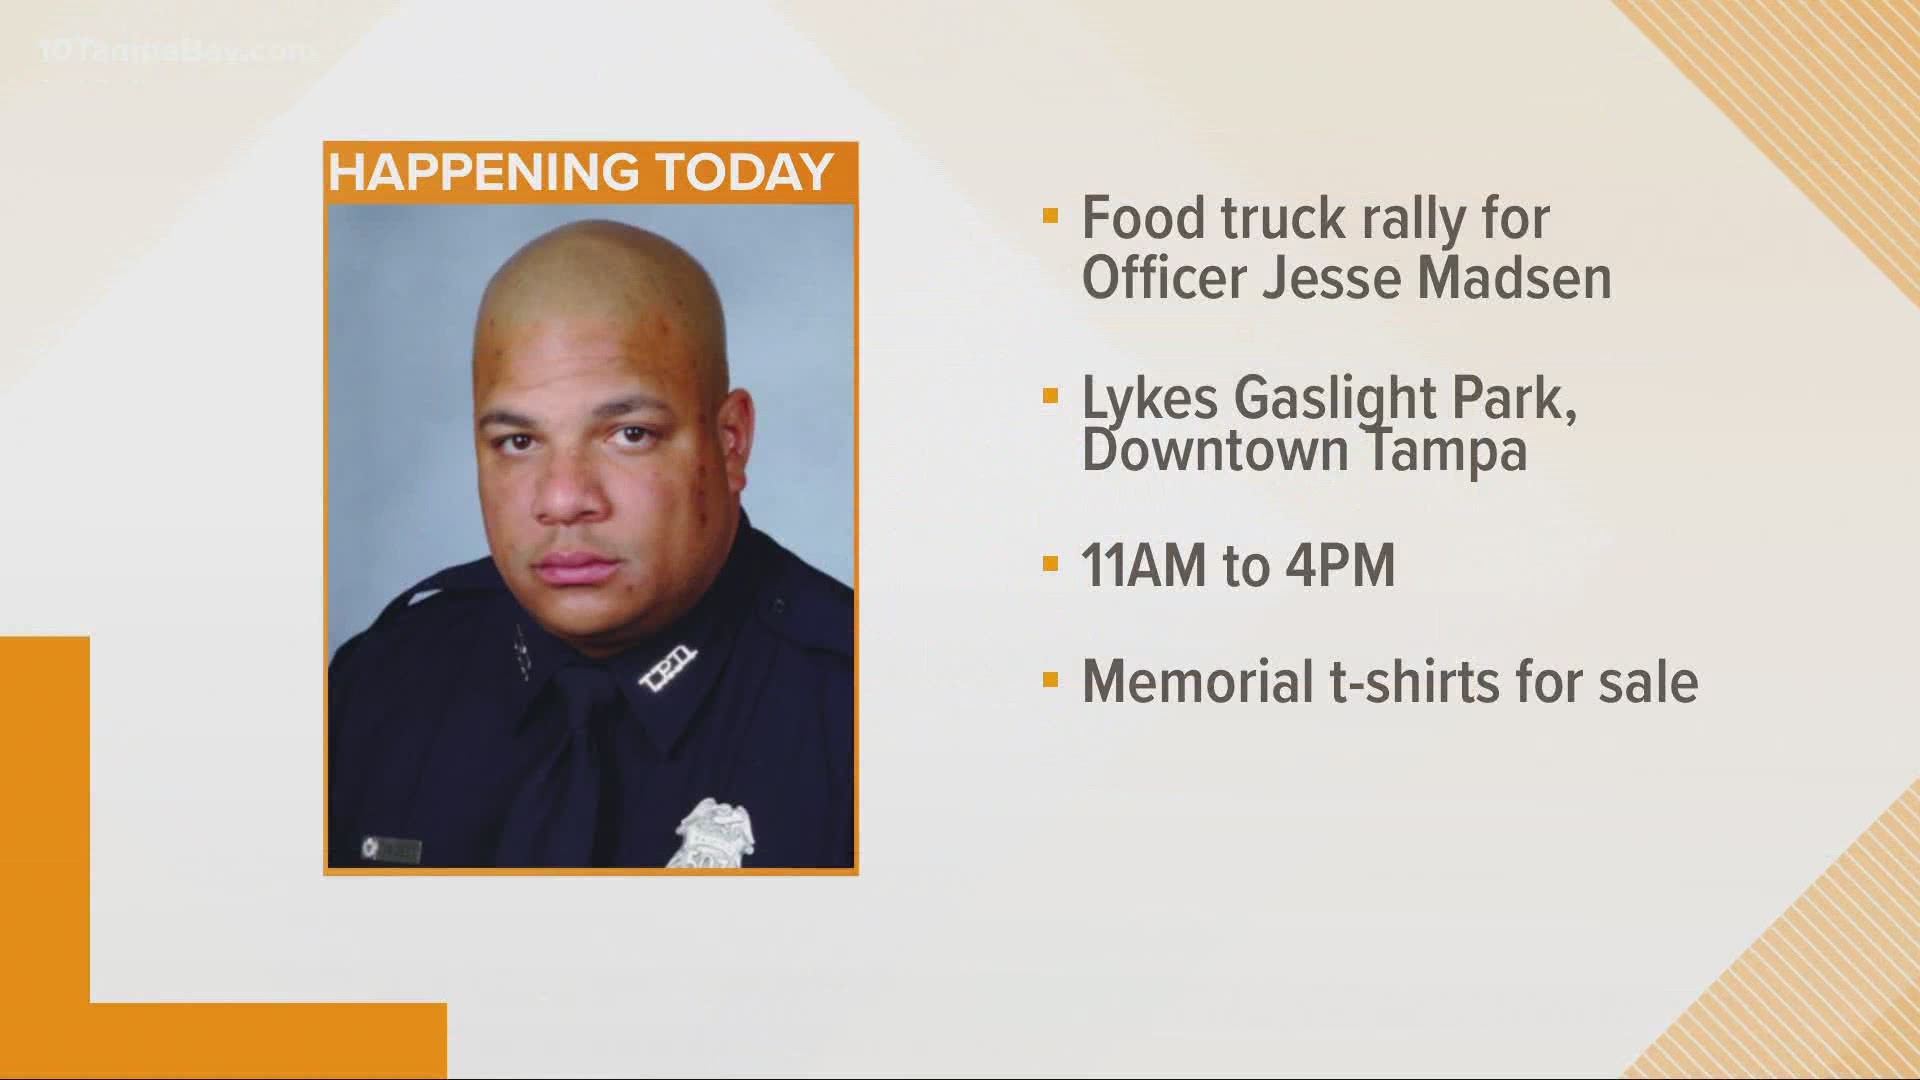 It's scheduled from 11 a.m. to 4 p.m. Sunday at Lykes Gaslight Park.